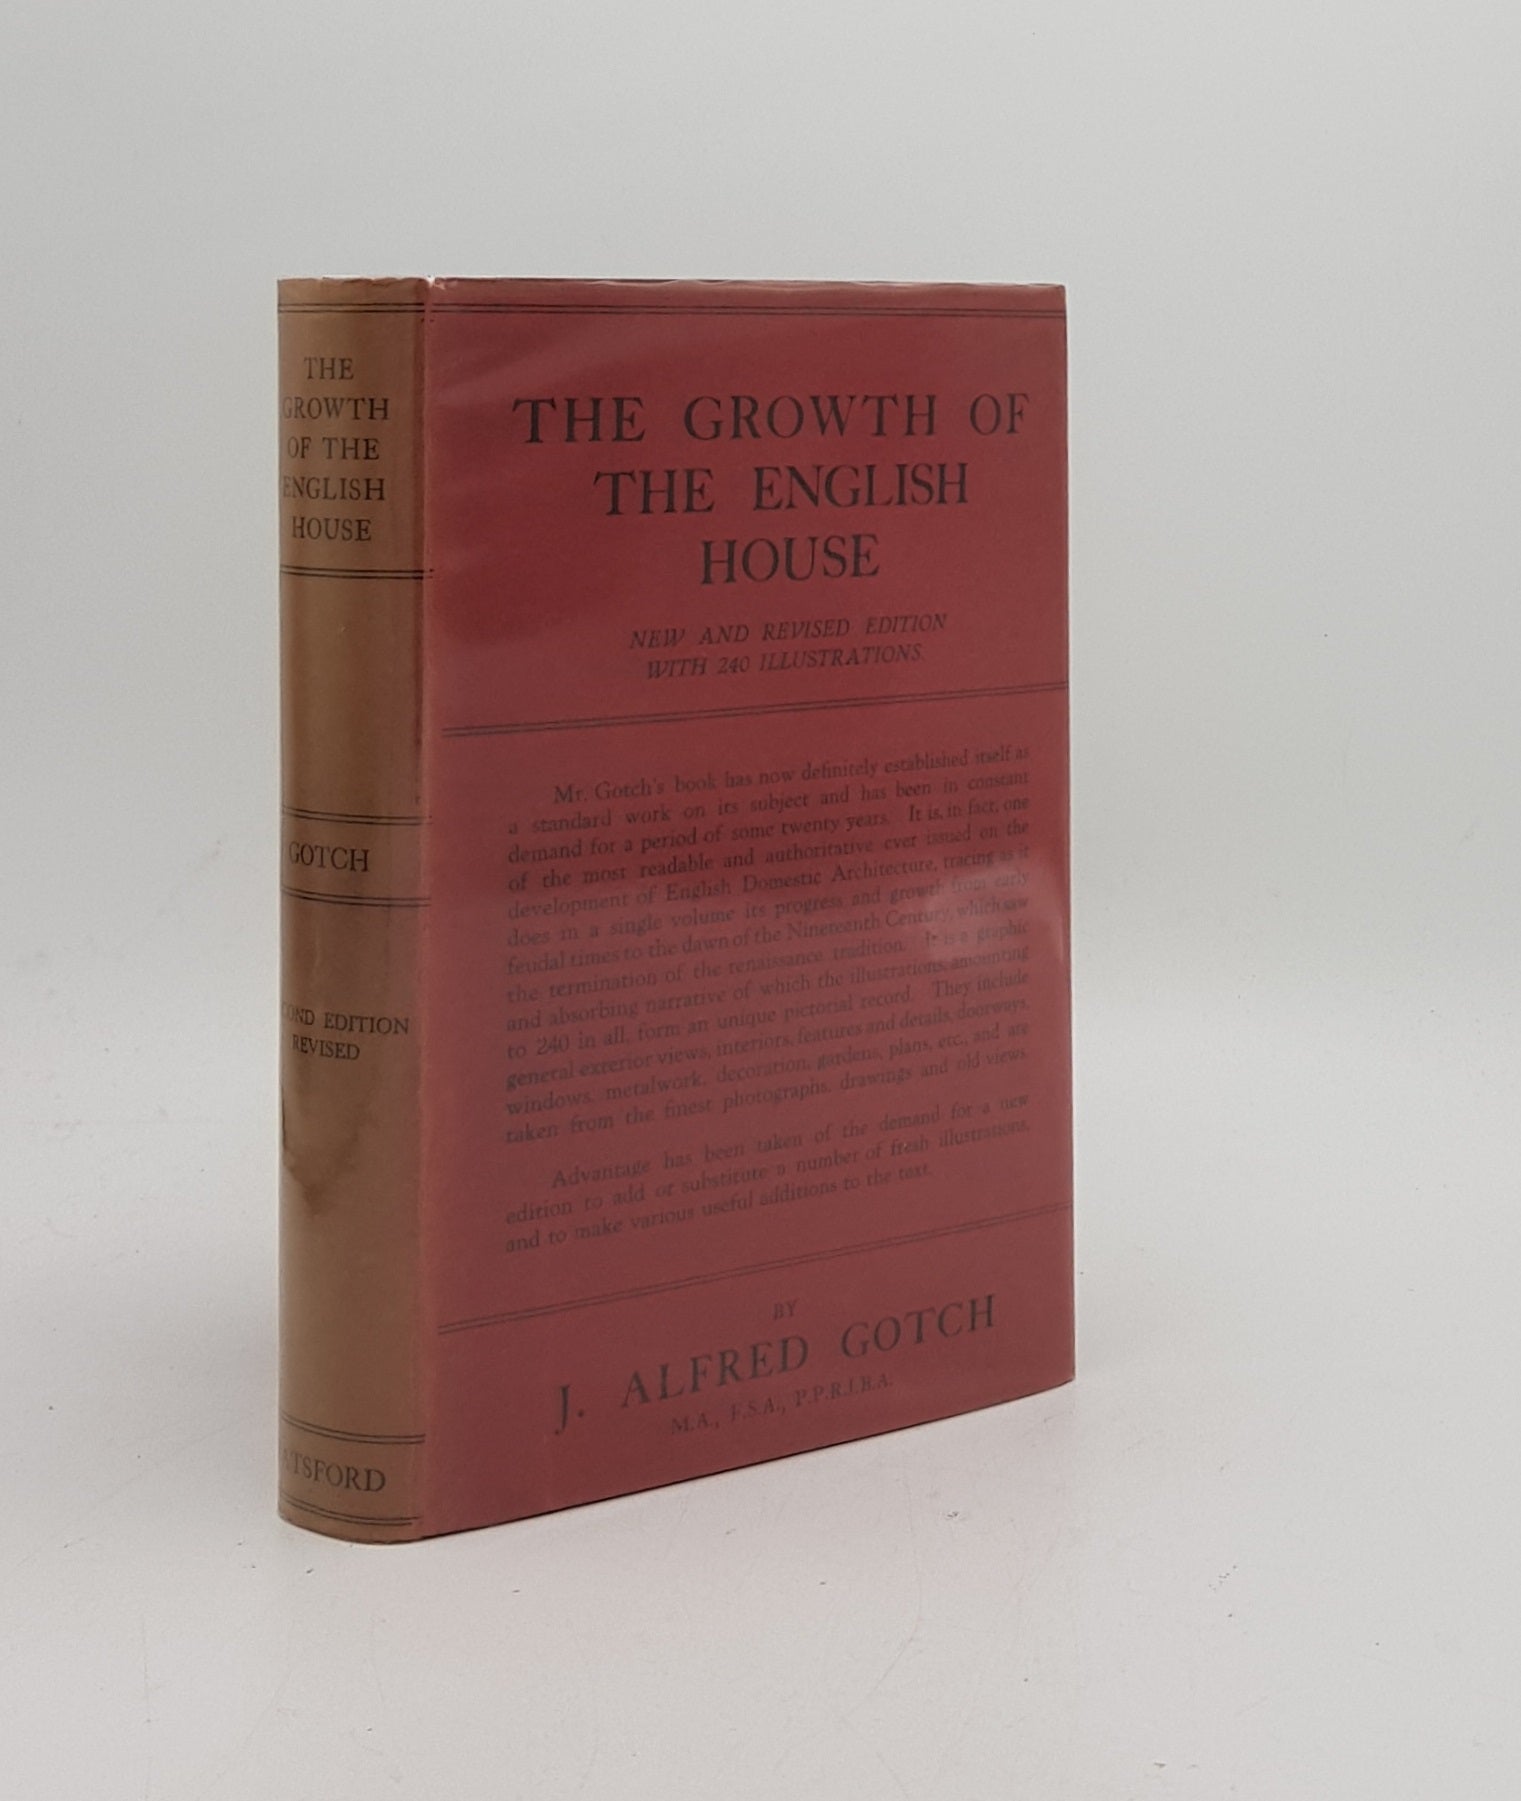 GOTCH J. Alfred - The Growth of the English House from Early Feudal Times to the Close of the Eighteenth Century